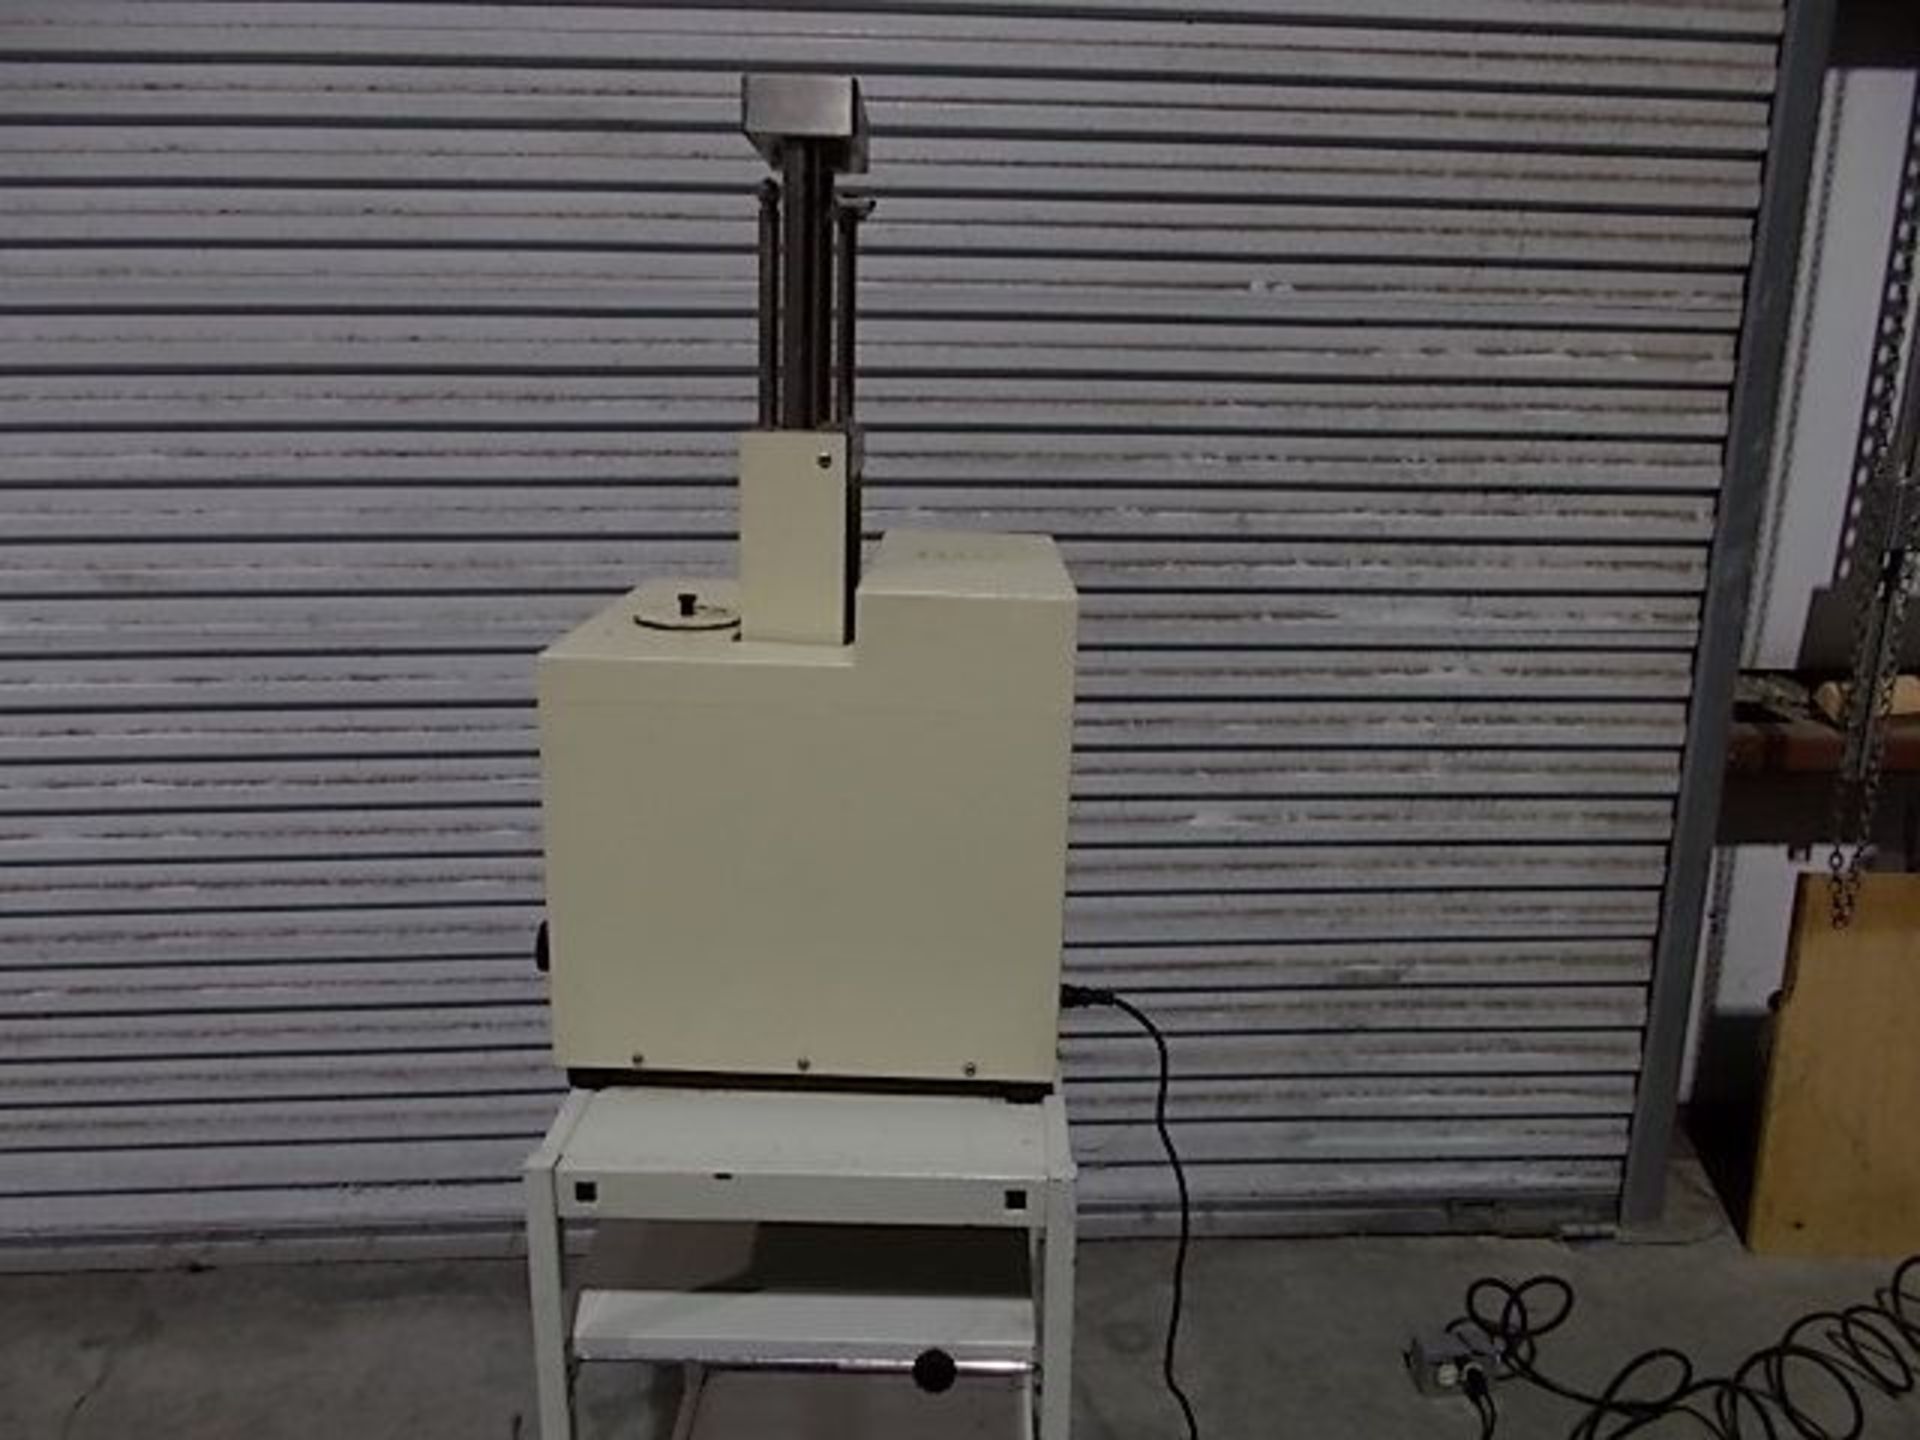 SLM Aminco French Pressure Cell Press Model FA-078, Qty 1, 321462158502 - Image 11 of 20